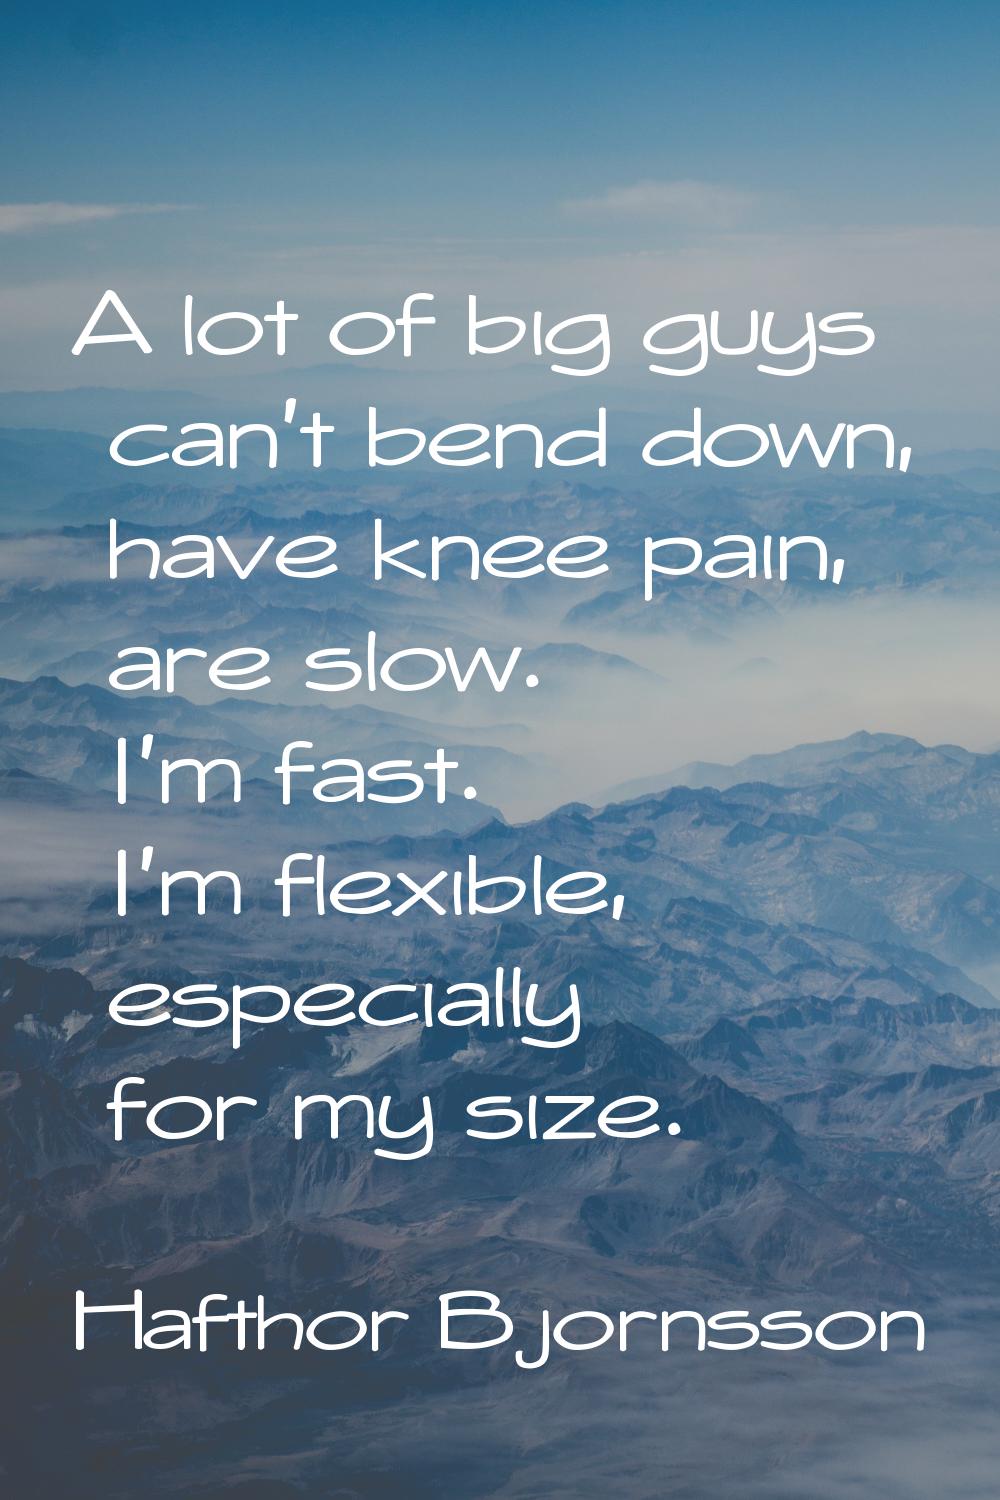 A lot of big guys can't bend down, have knee pain, are slow. I'm fast. I'm flexible, especially for